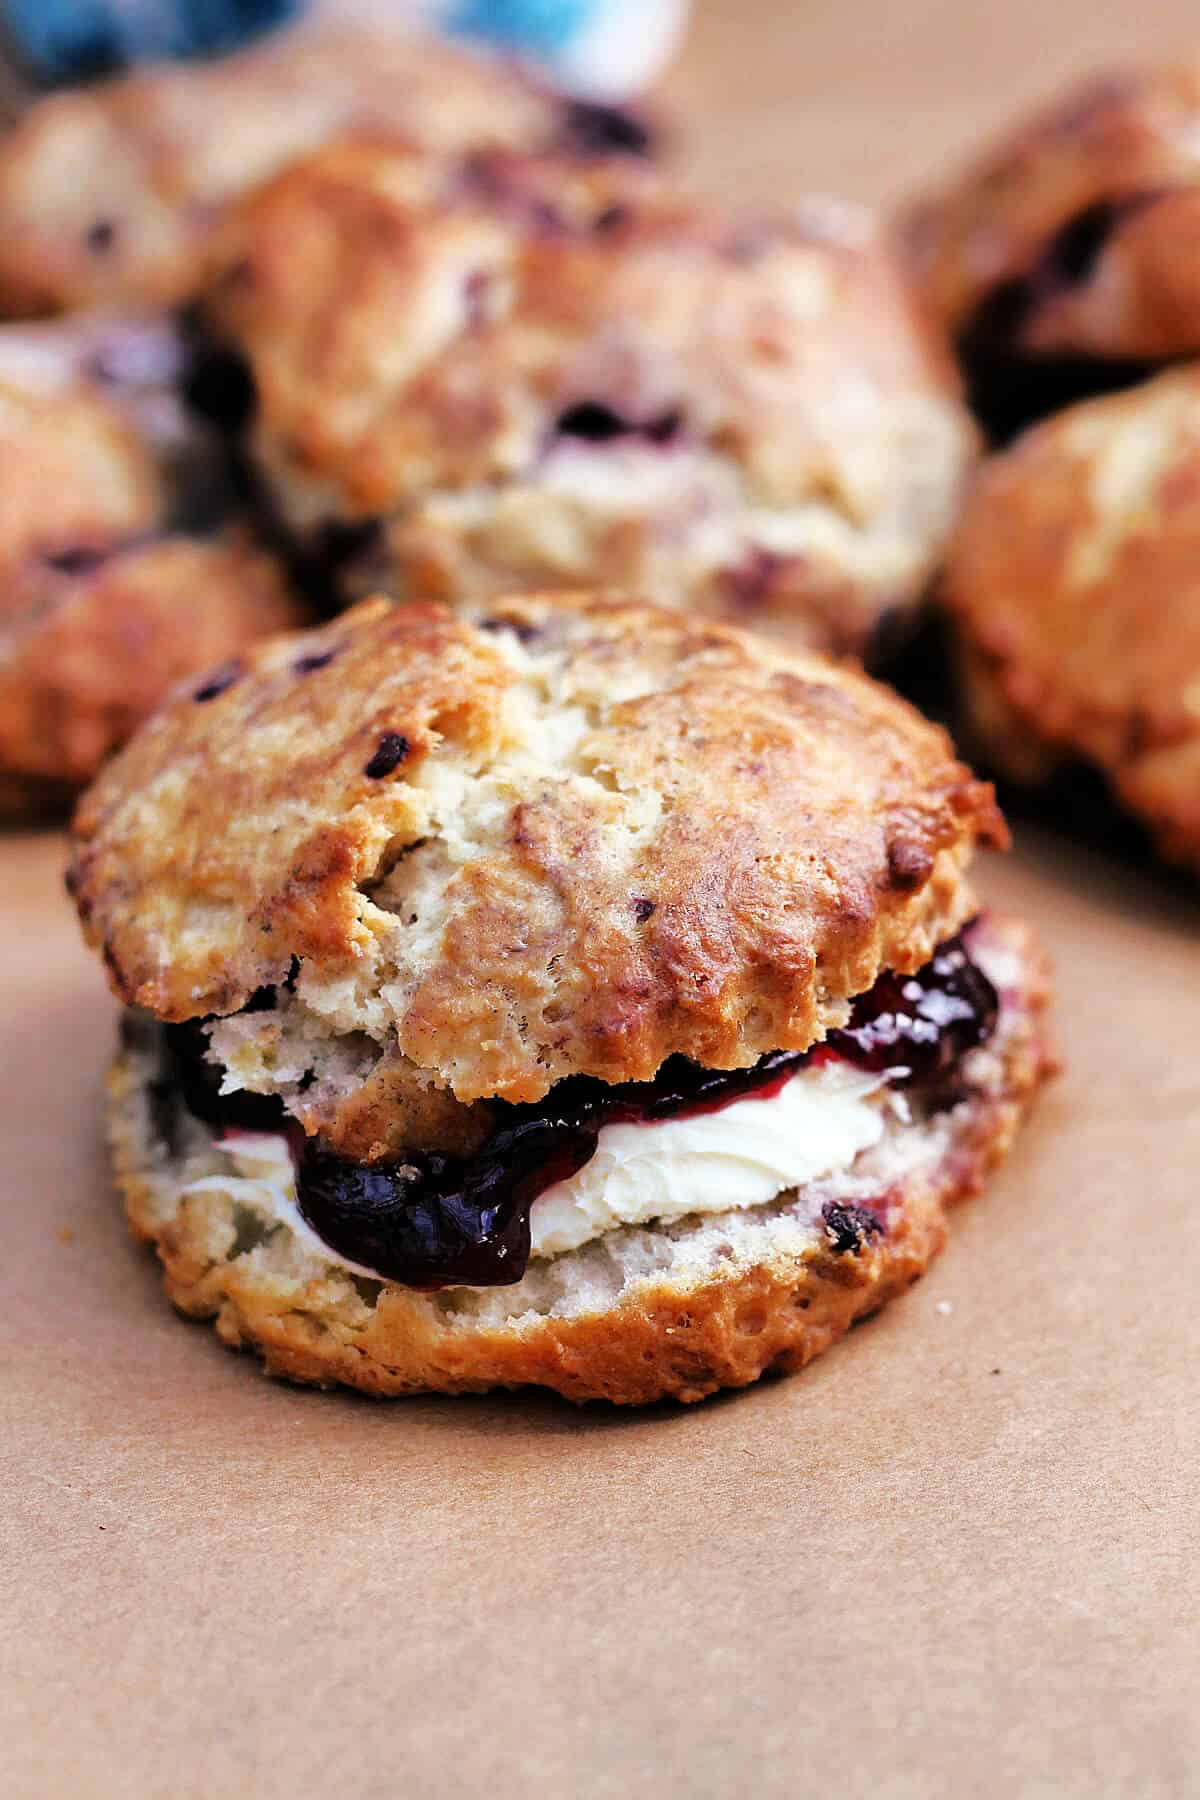 Close up of scone filled with clotted cream and jam.